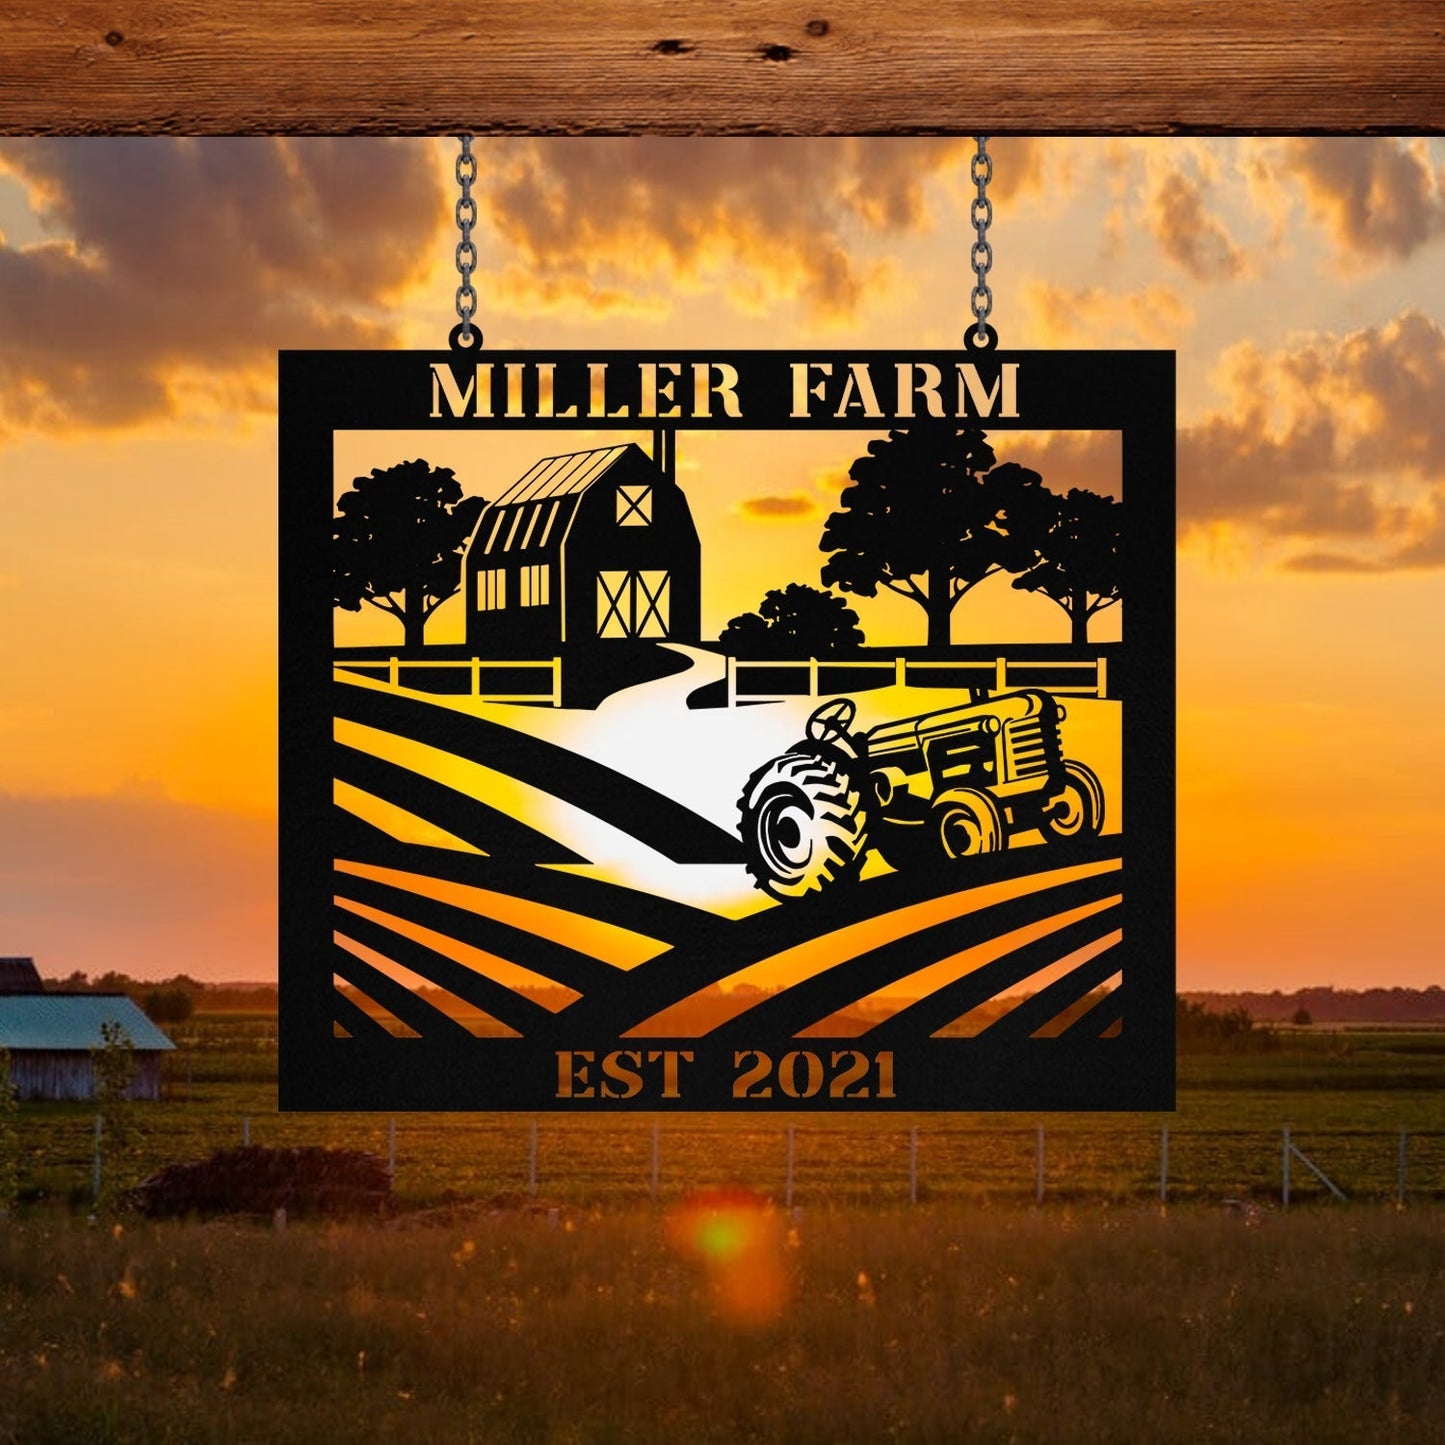 Personalized Metal Farm Sign Barn Tractor Monogram Custom Outdoor Farmhouse Front Gate Entry Road Wall Decor Art Gift